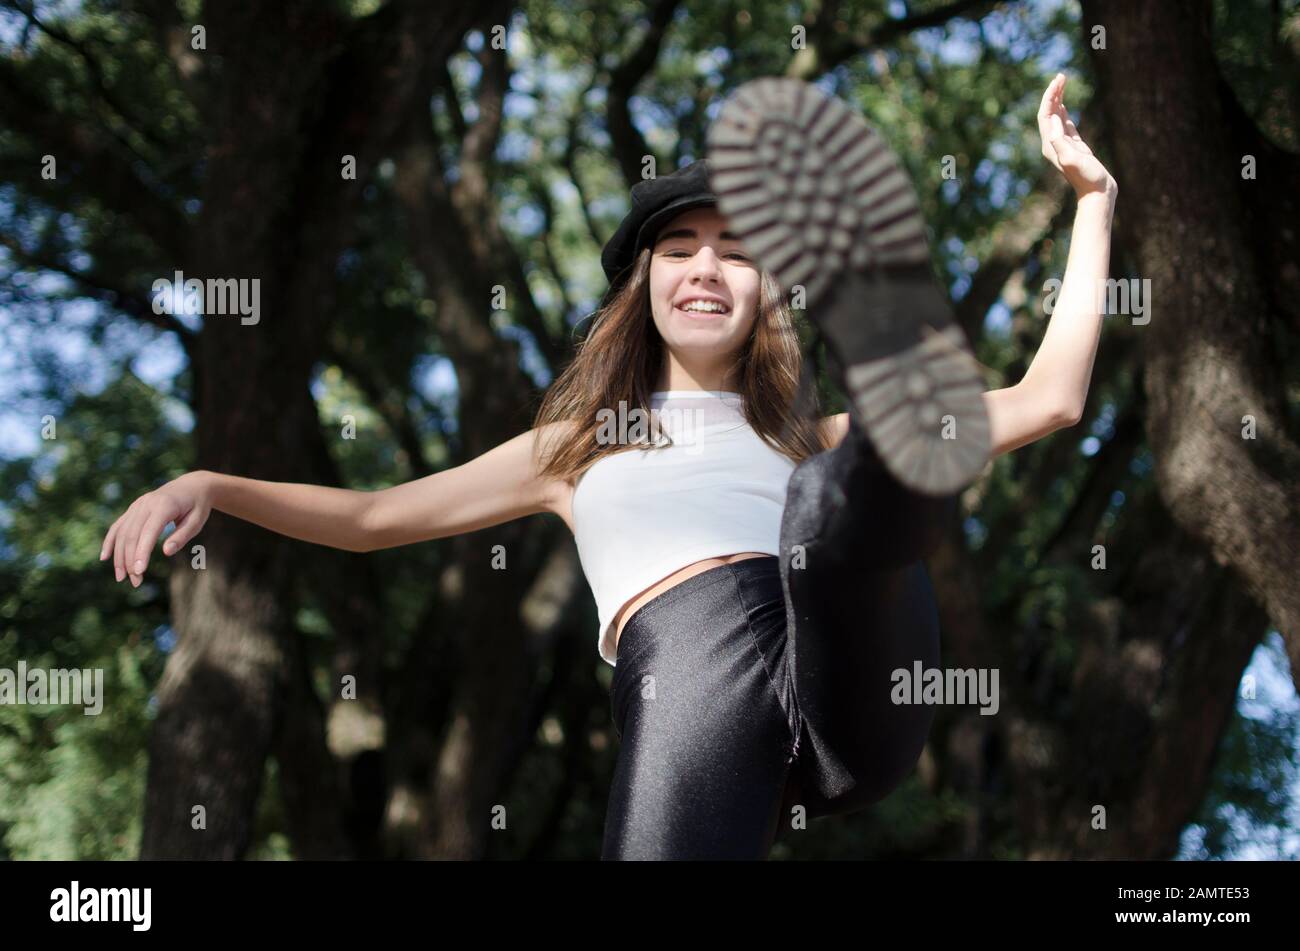 Smiling teenage girl standing in a park kicking her leg in the air, Argentina Stock Photo